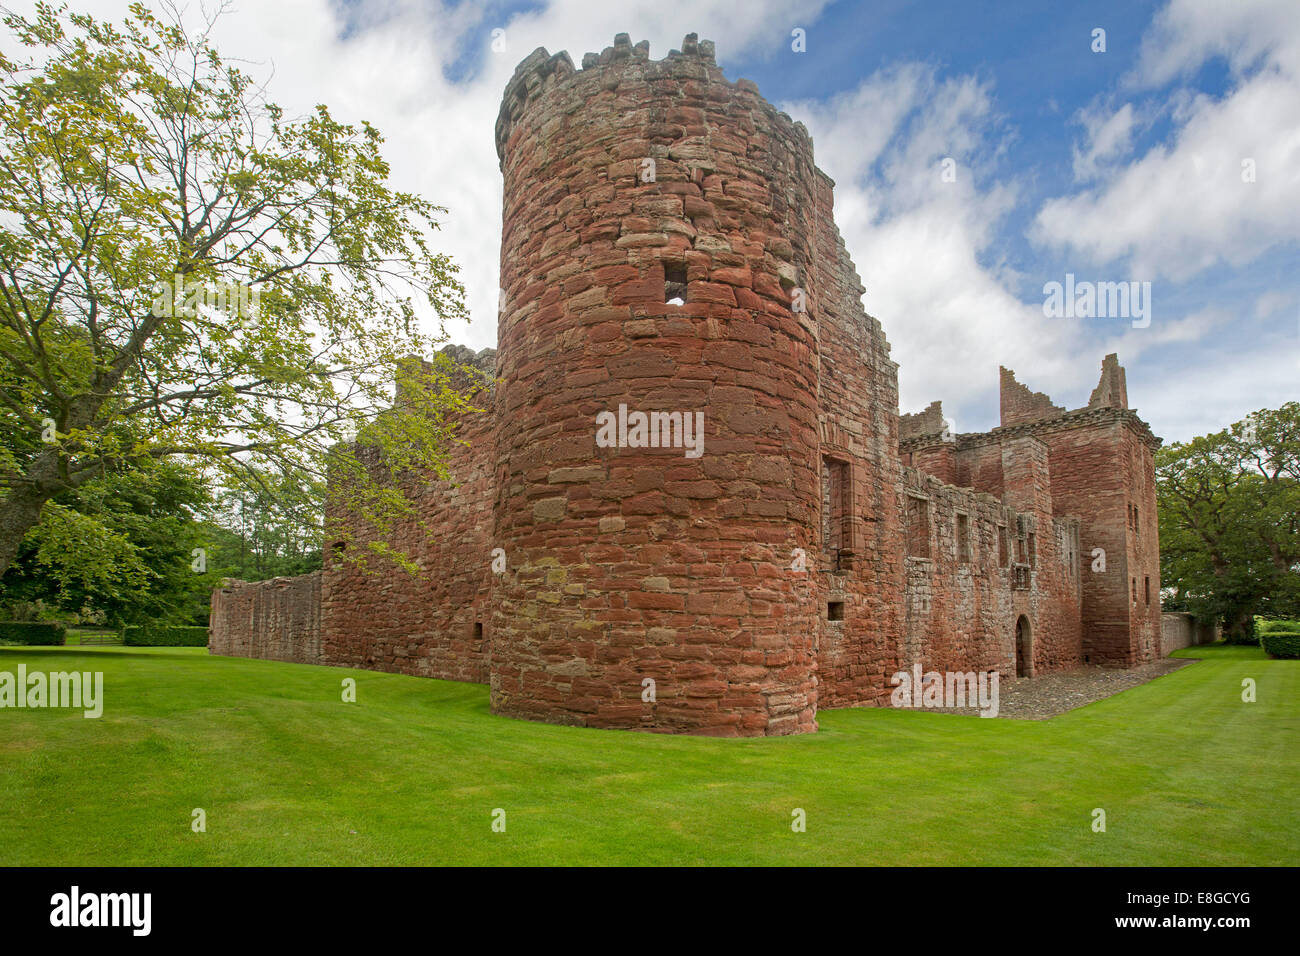 Extensive ruins of historic 16th century Edzell castle with cylindrical red stone towers & high walls under blue sky in Scotland Stock Photo